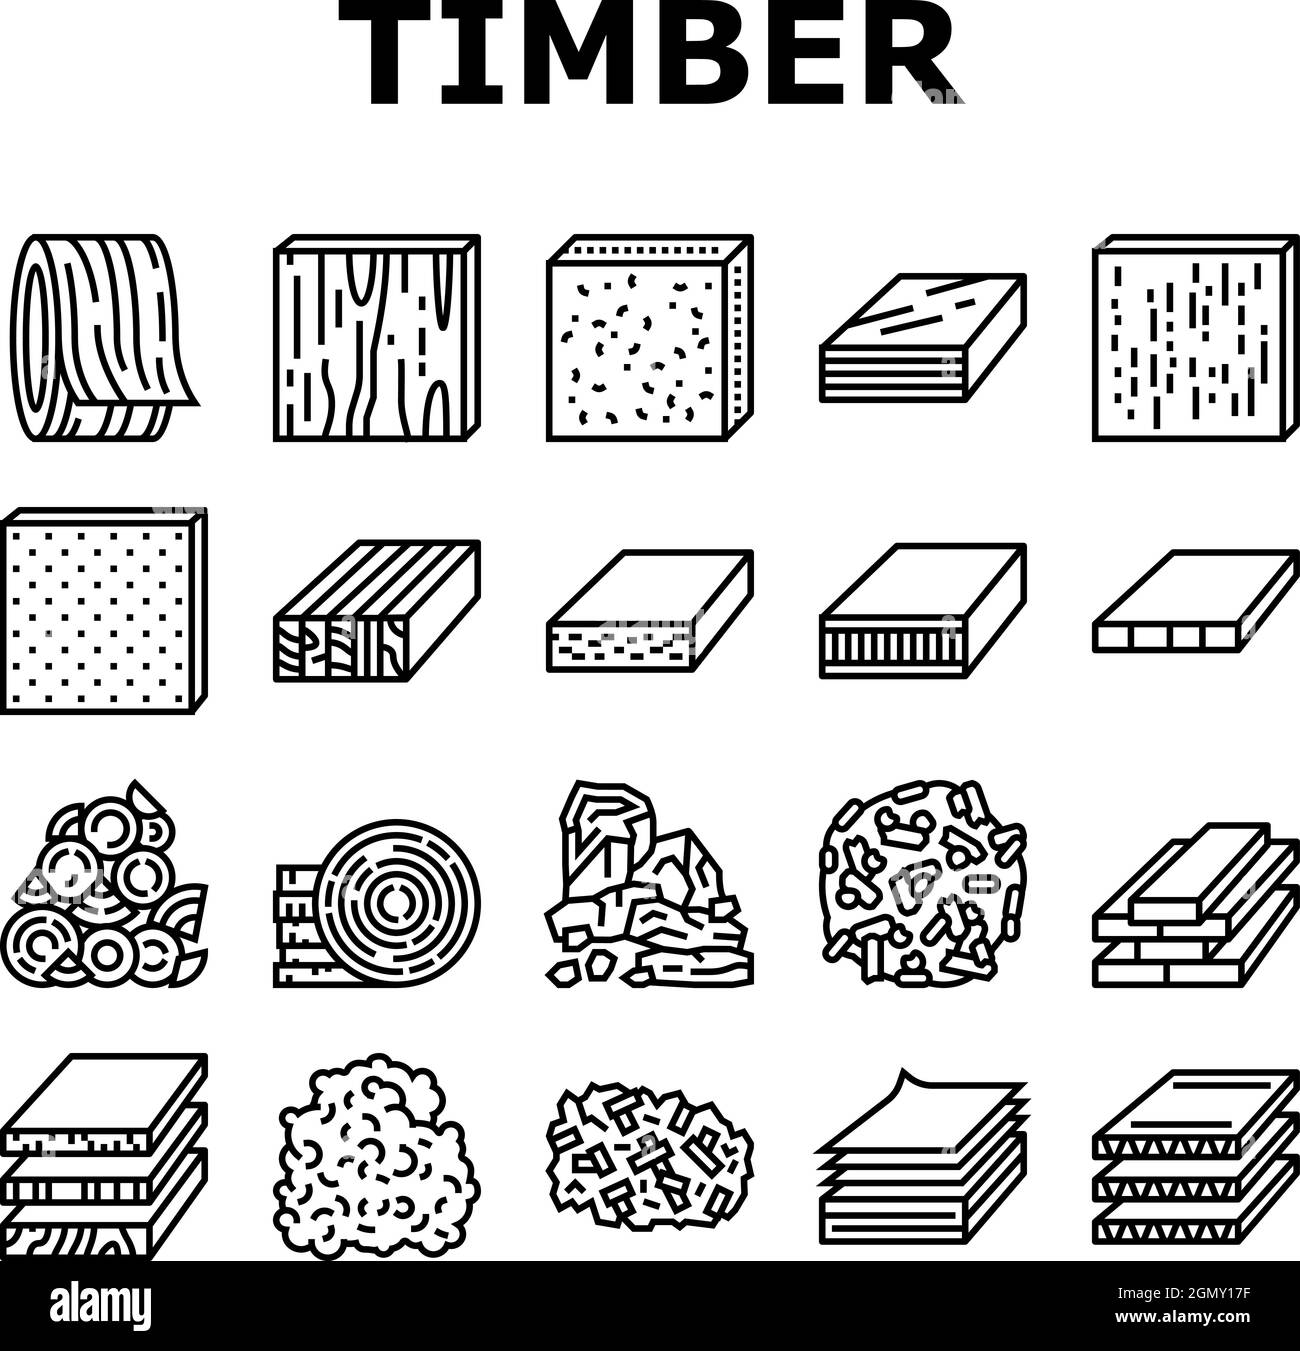 Timber Wood Industrial Production Icons Set Vector. Fiber Board And Round Wooden Desk, Pellets And Plywood Timber Line. Charcoal And Paper List Sheet Stock Vector